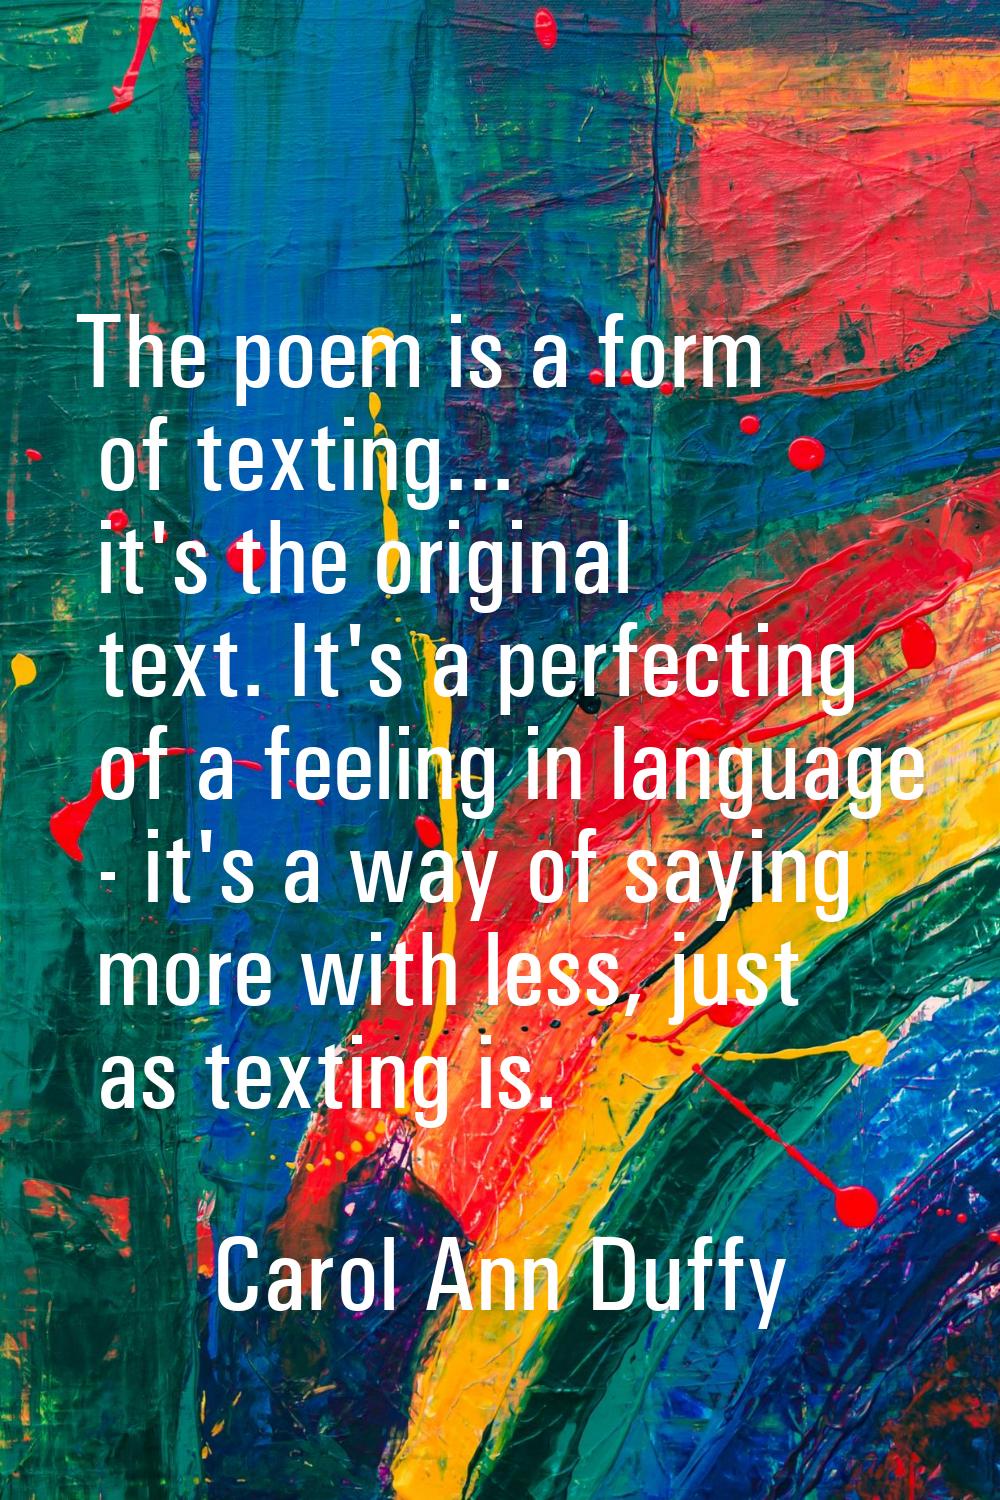 The poem is a form of texting... it's the original text. It's a perfecting of a feeling in language